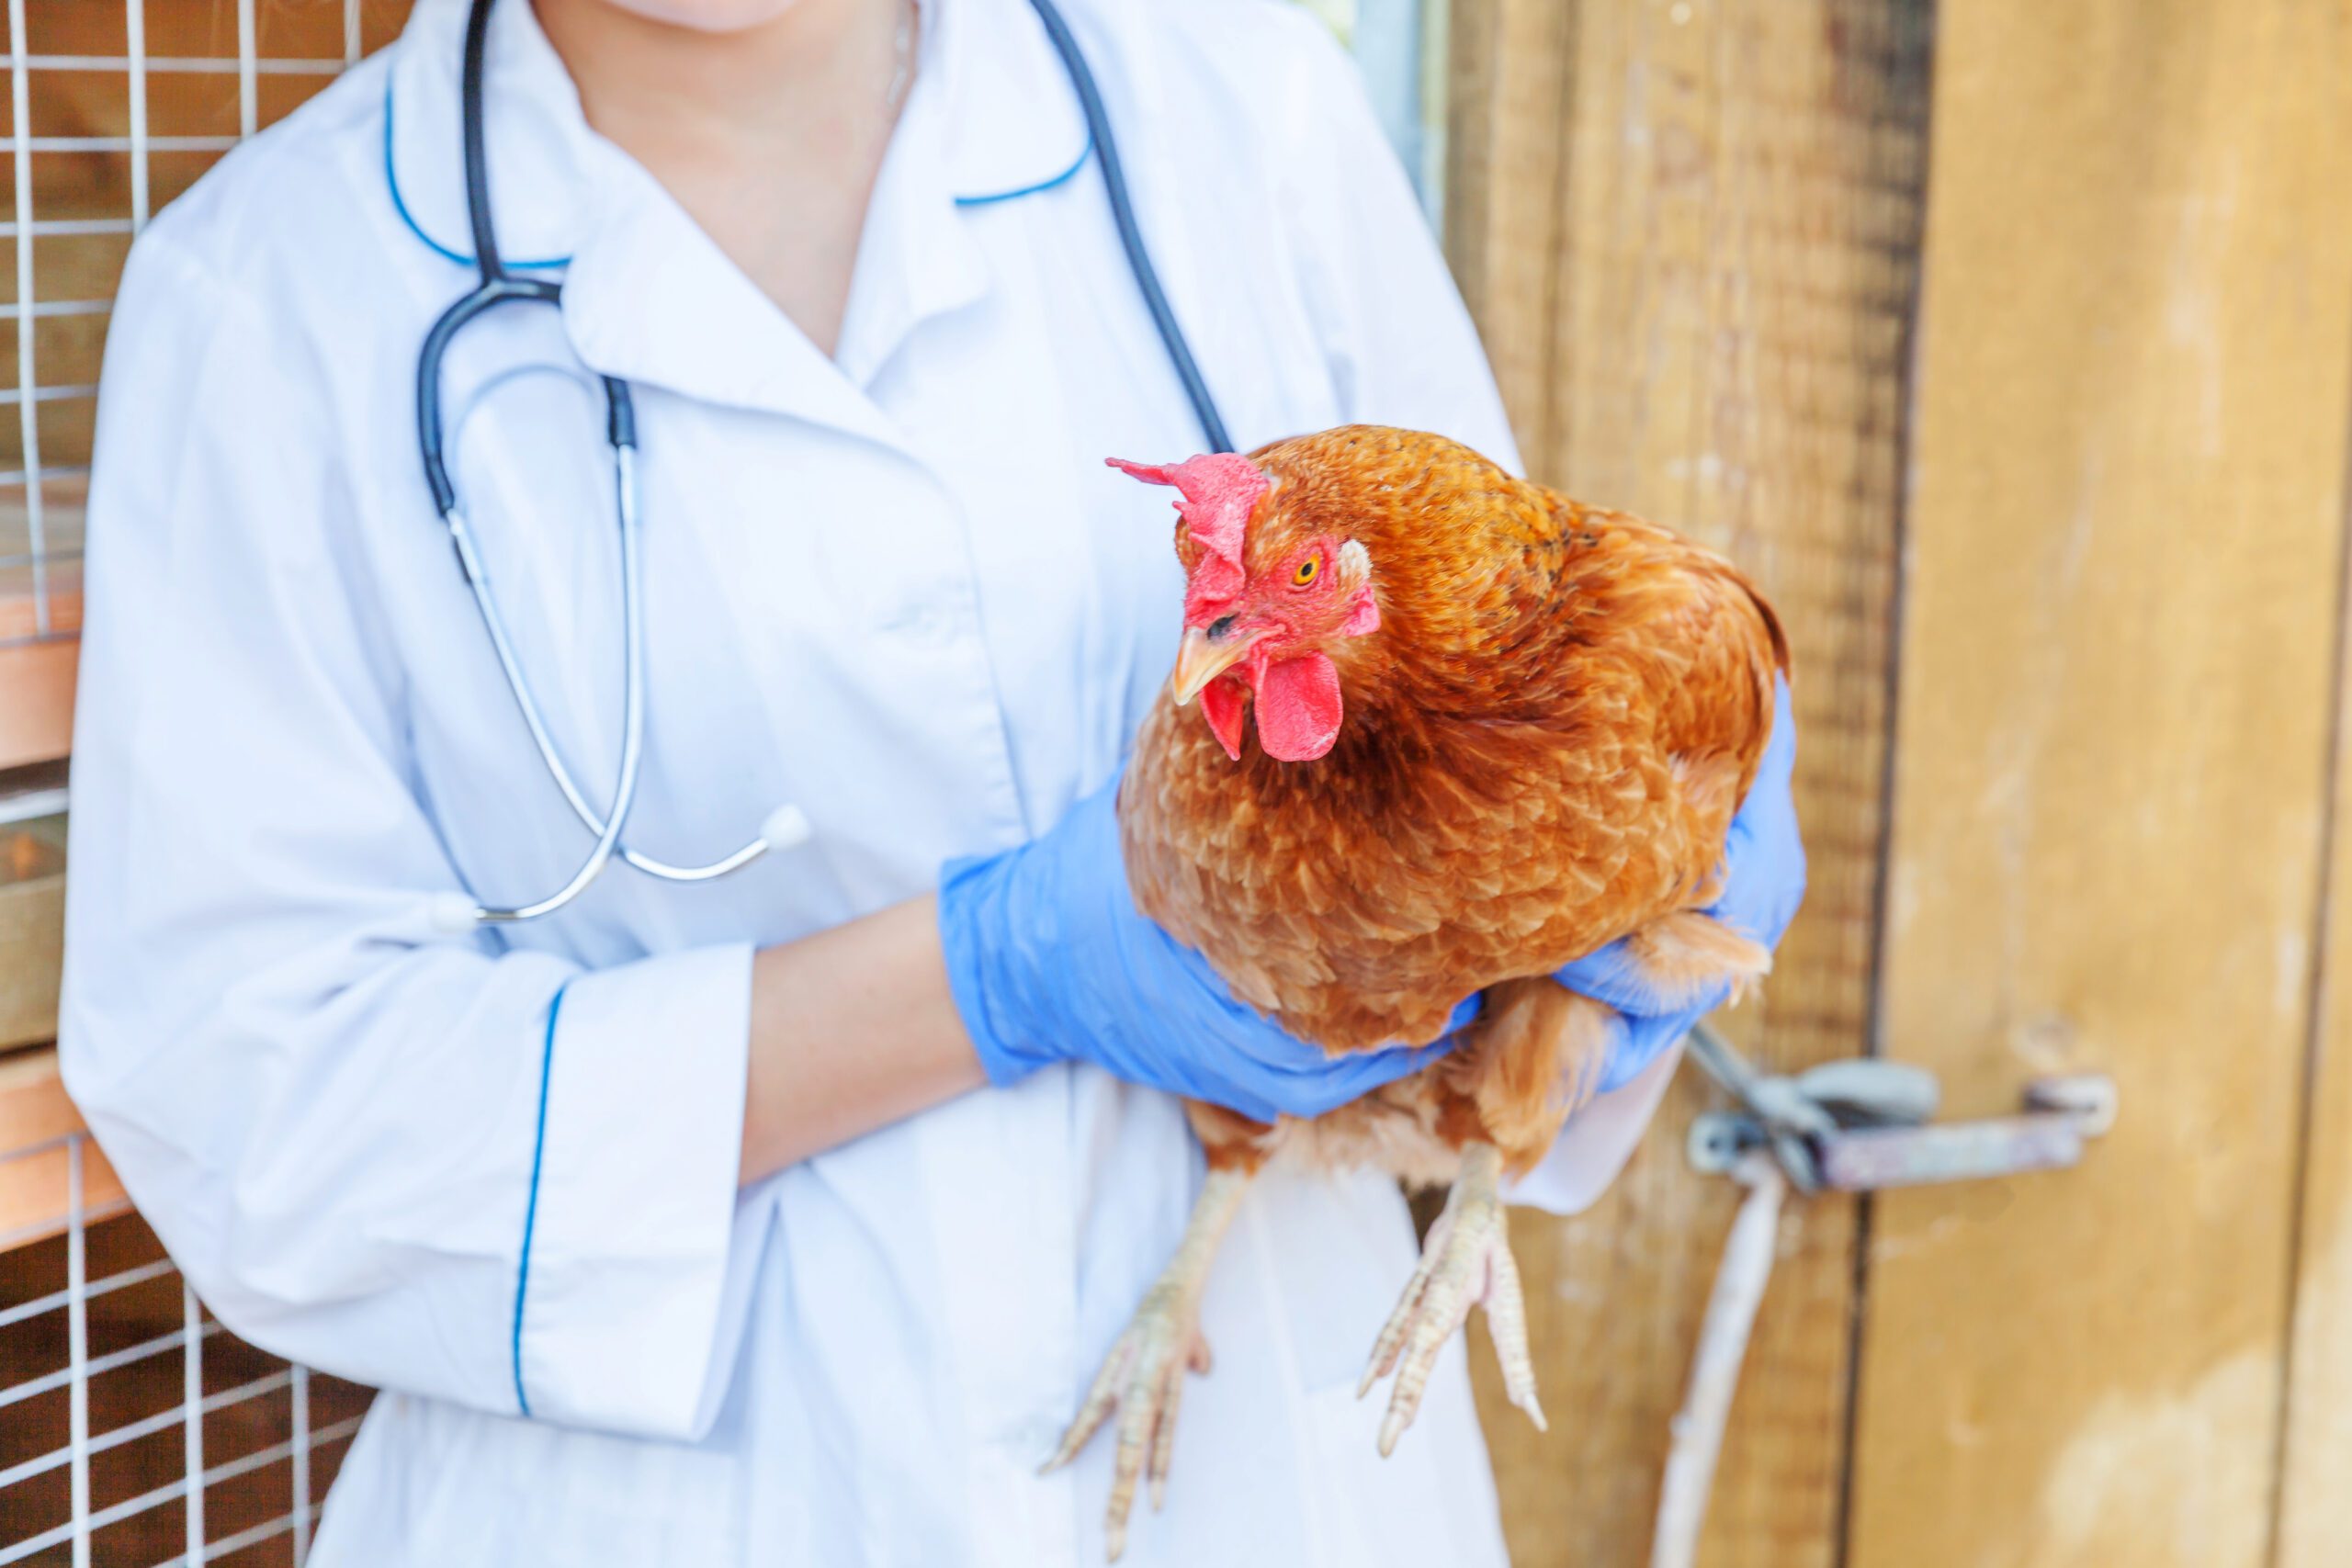 Caring For The Rooster During Illness